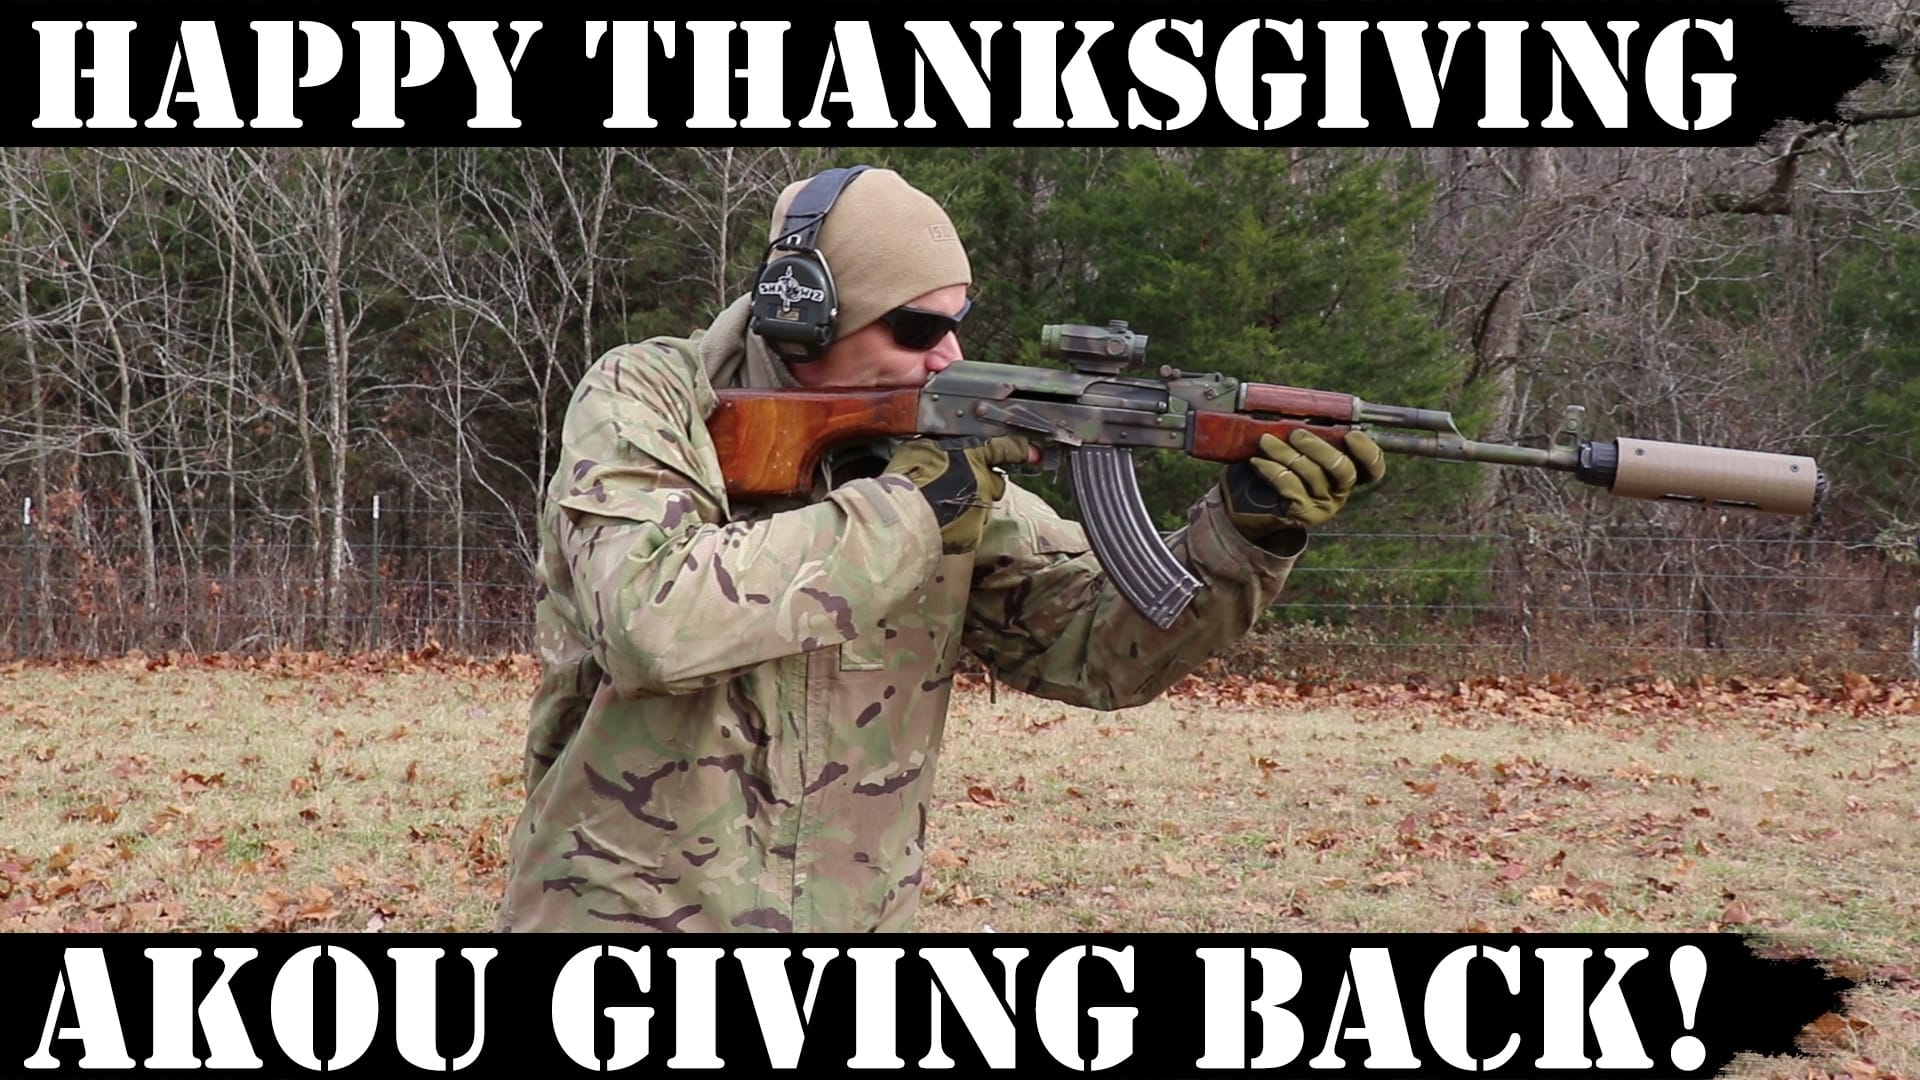 Happy Thanksgiving, AKOU is giving back!